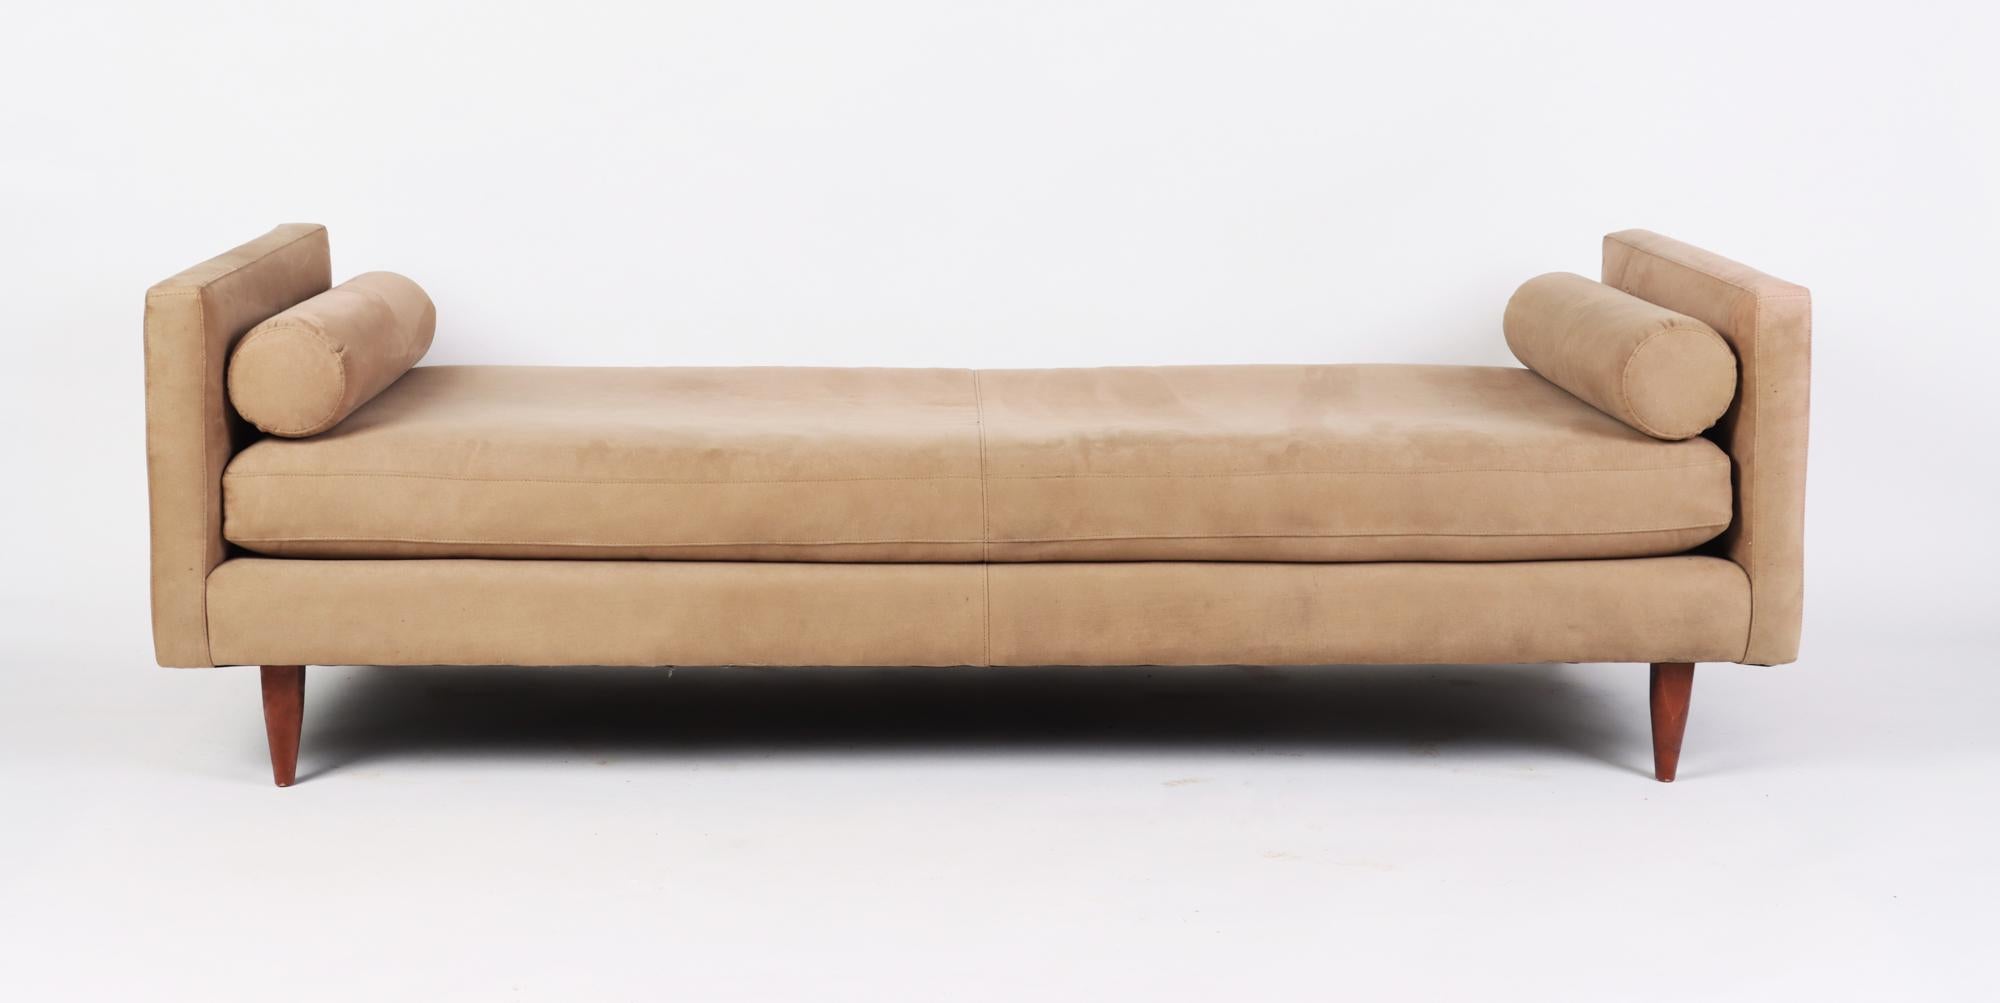 A Mid Century style day bed, tapered legs and plush, blend down cushions.
Beige suede upholstery.